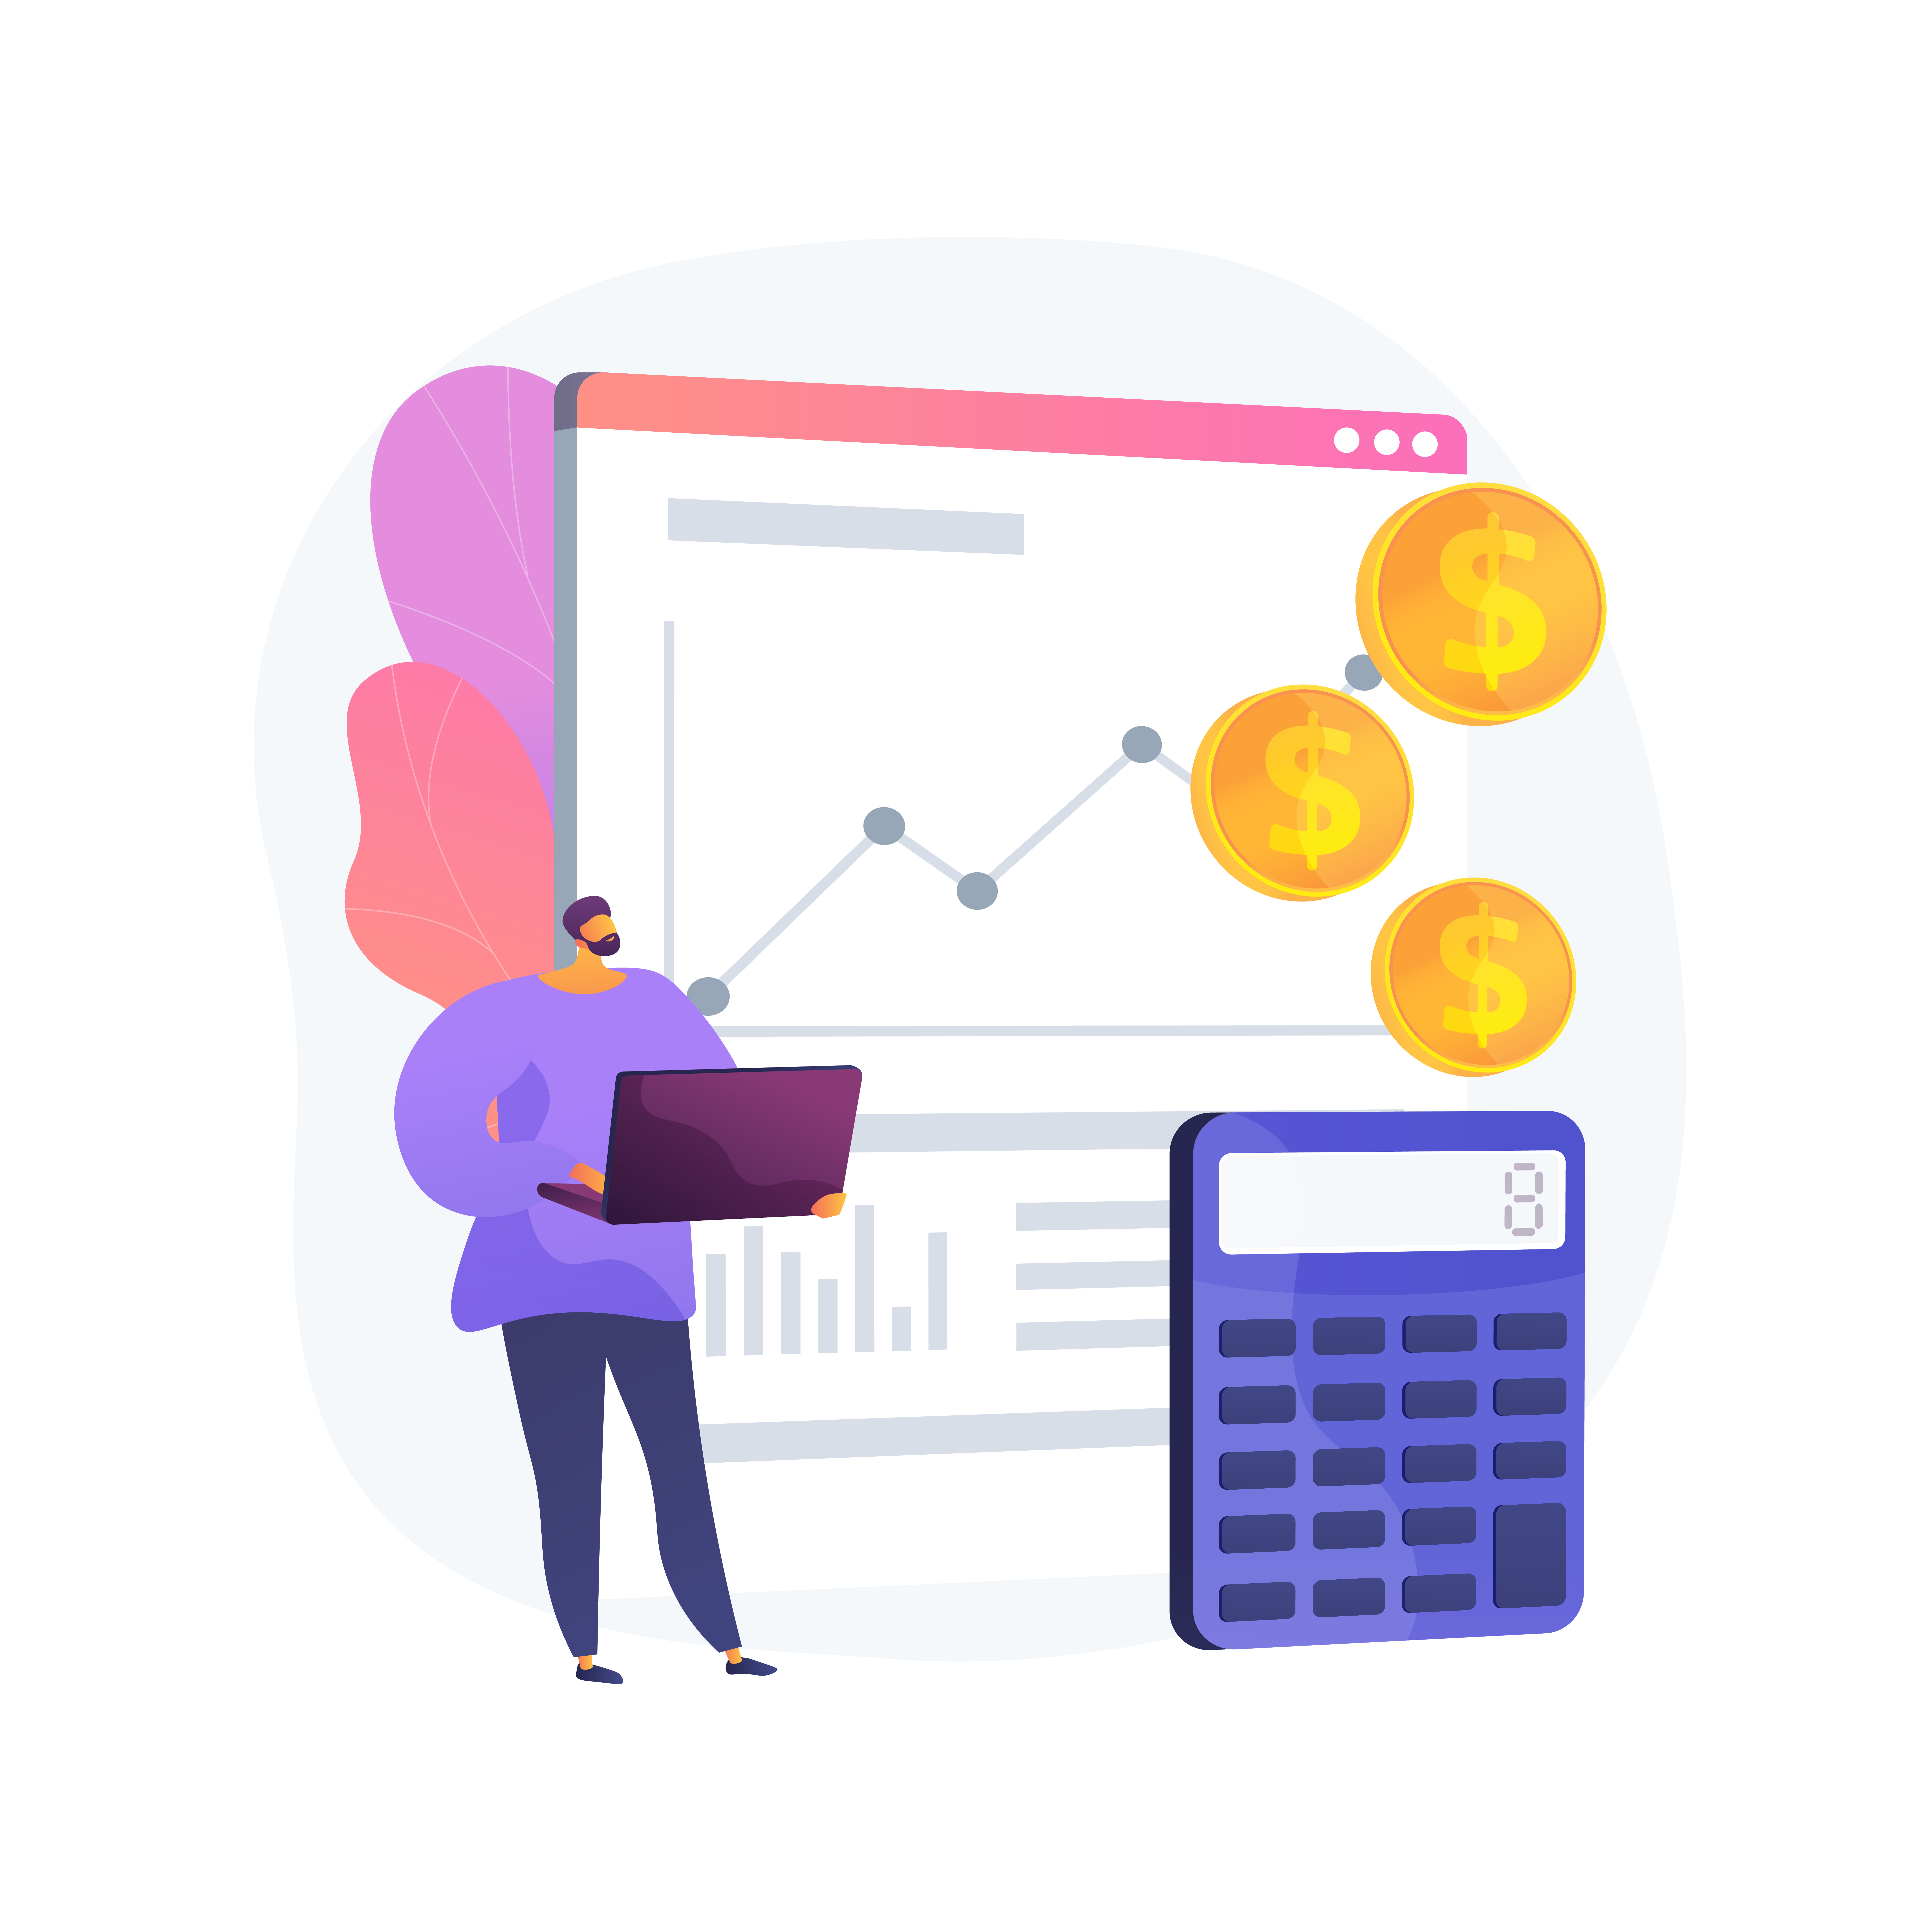 Business accounting, profit growth, calculation. Data analysis, analytics and statistics. Accountant, bookkeeper with laptop cartoon character. Vector isolated concept metaphor illustration.